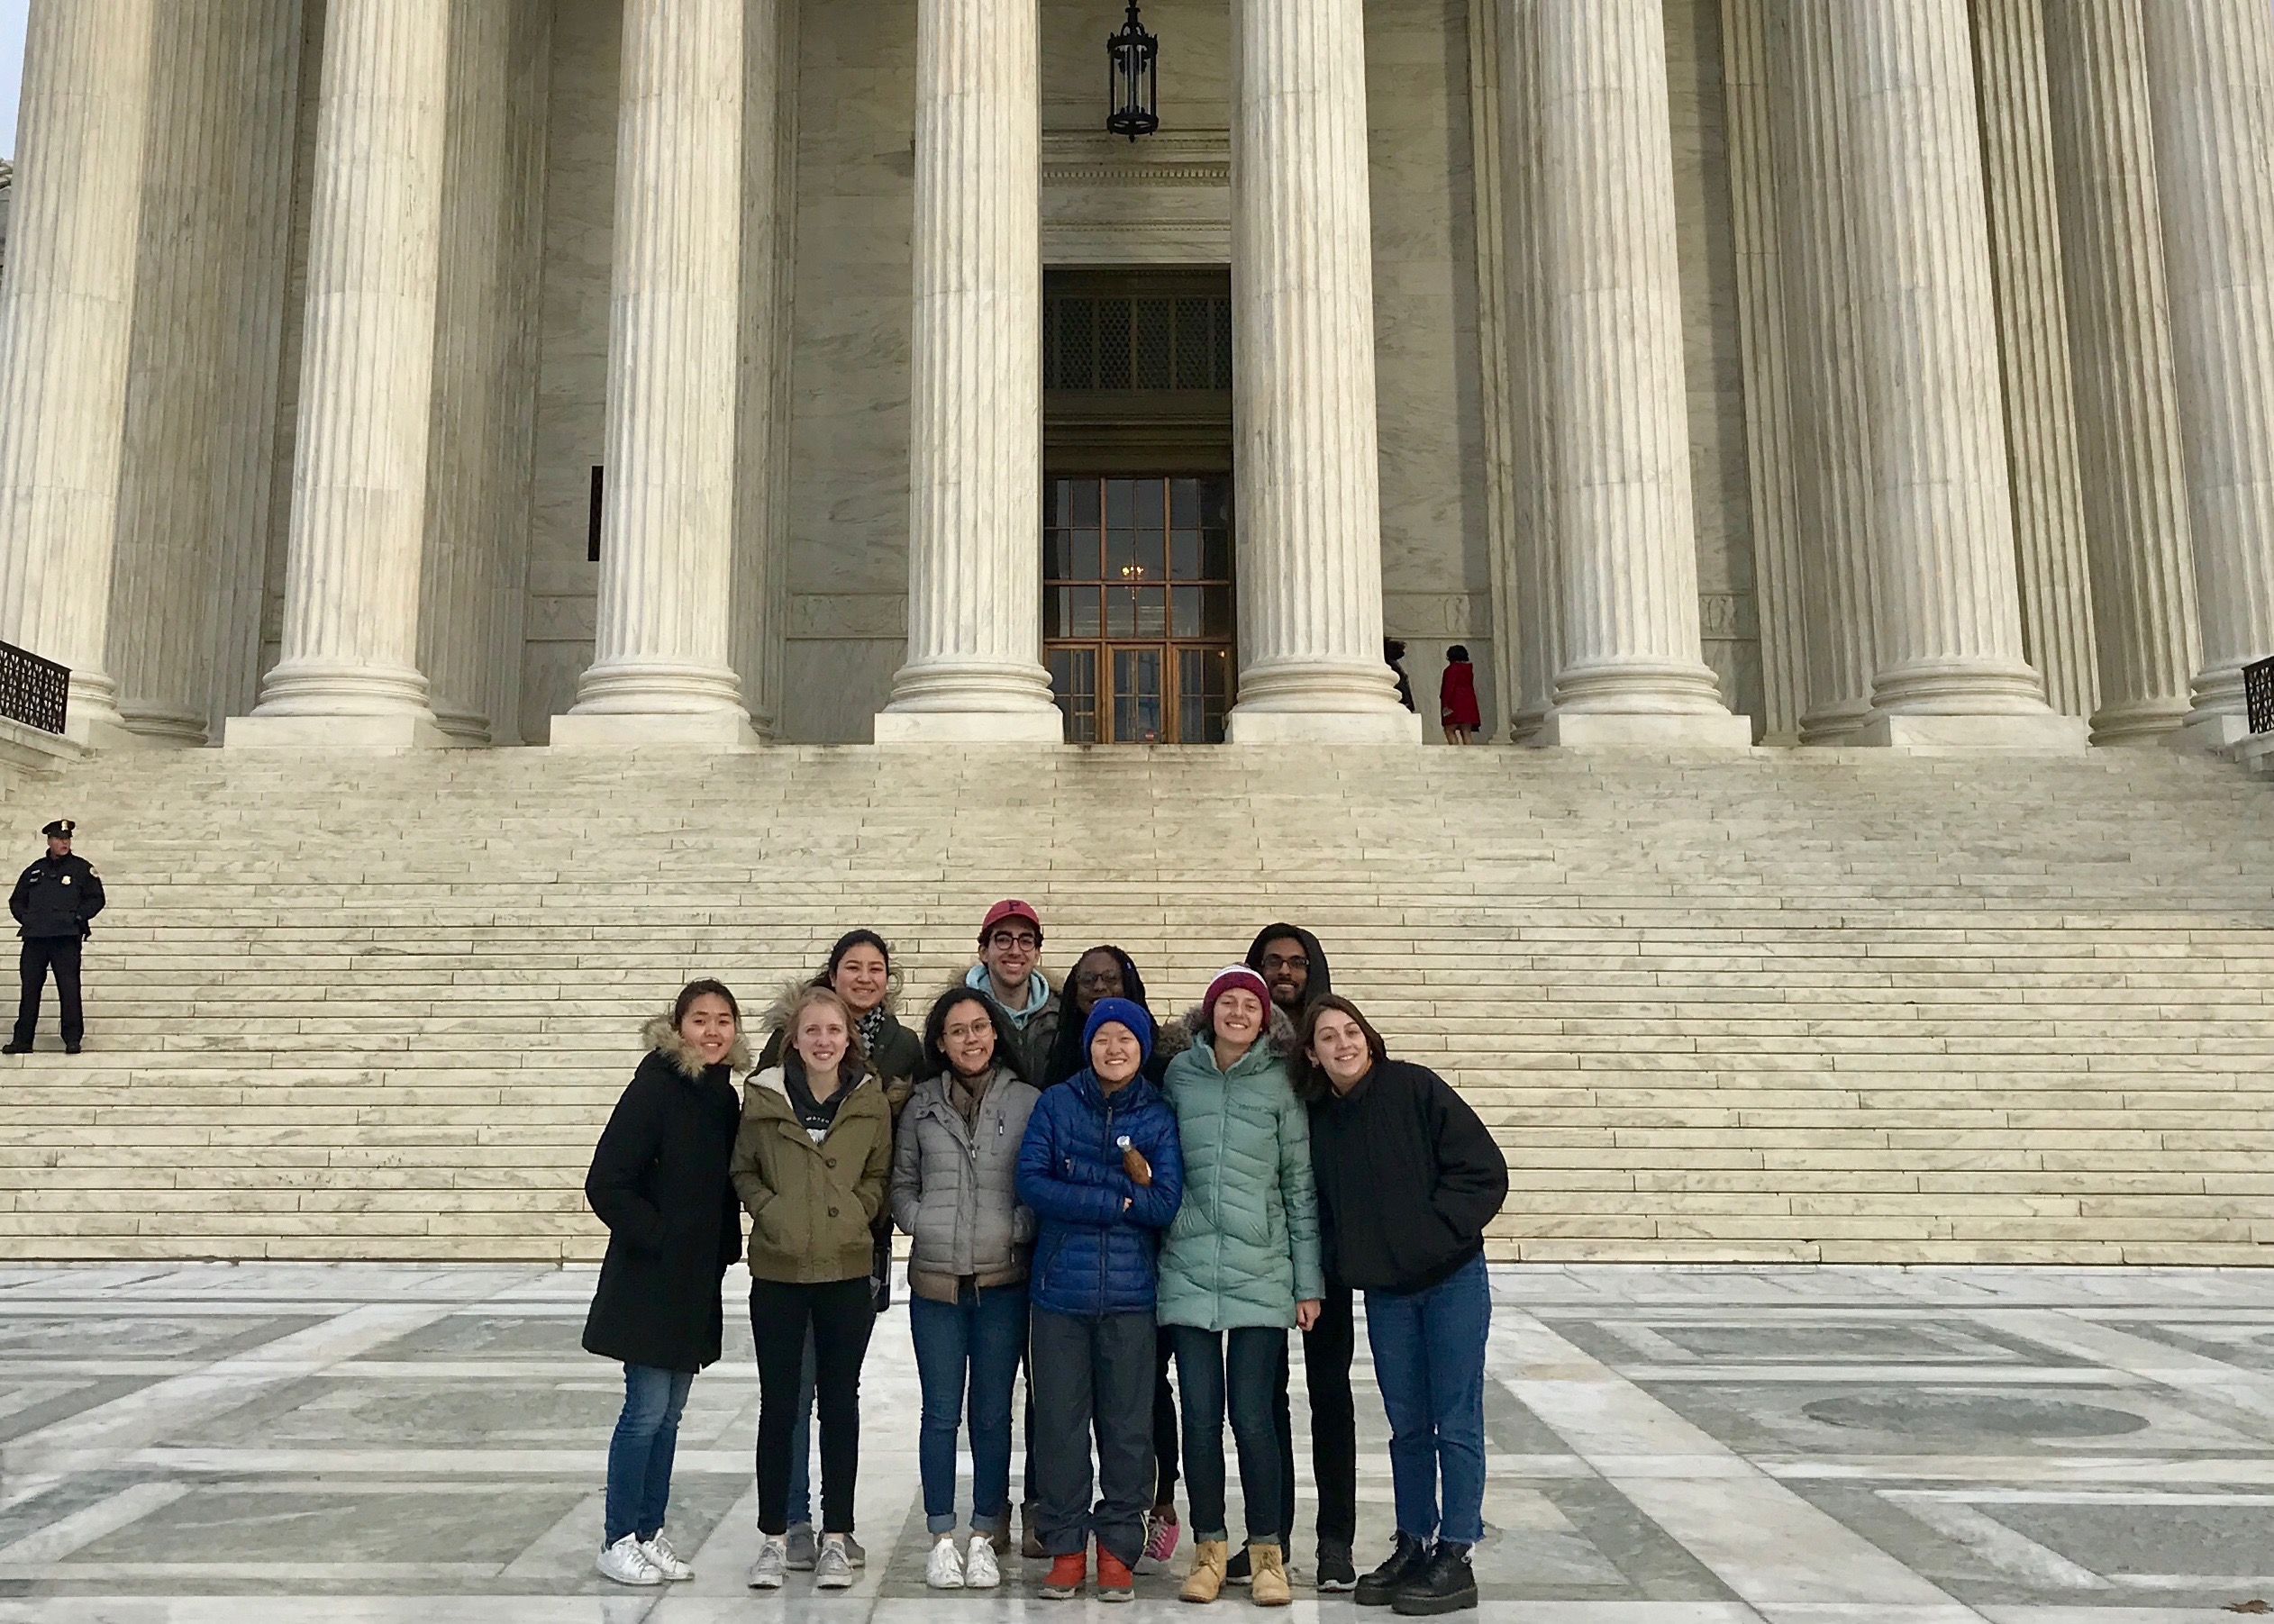 Ten students standing in front of the steps of the Supreme Court building in Washington, D.C.